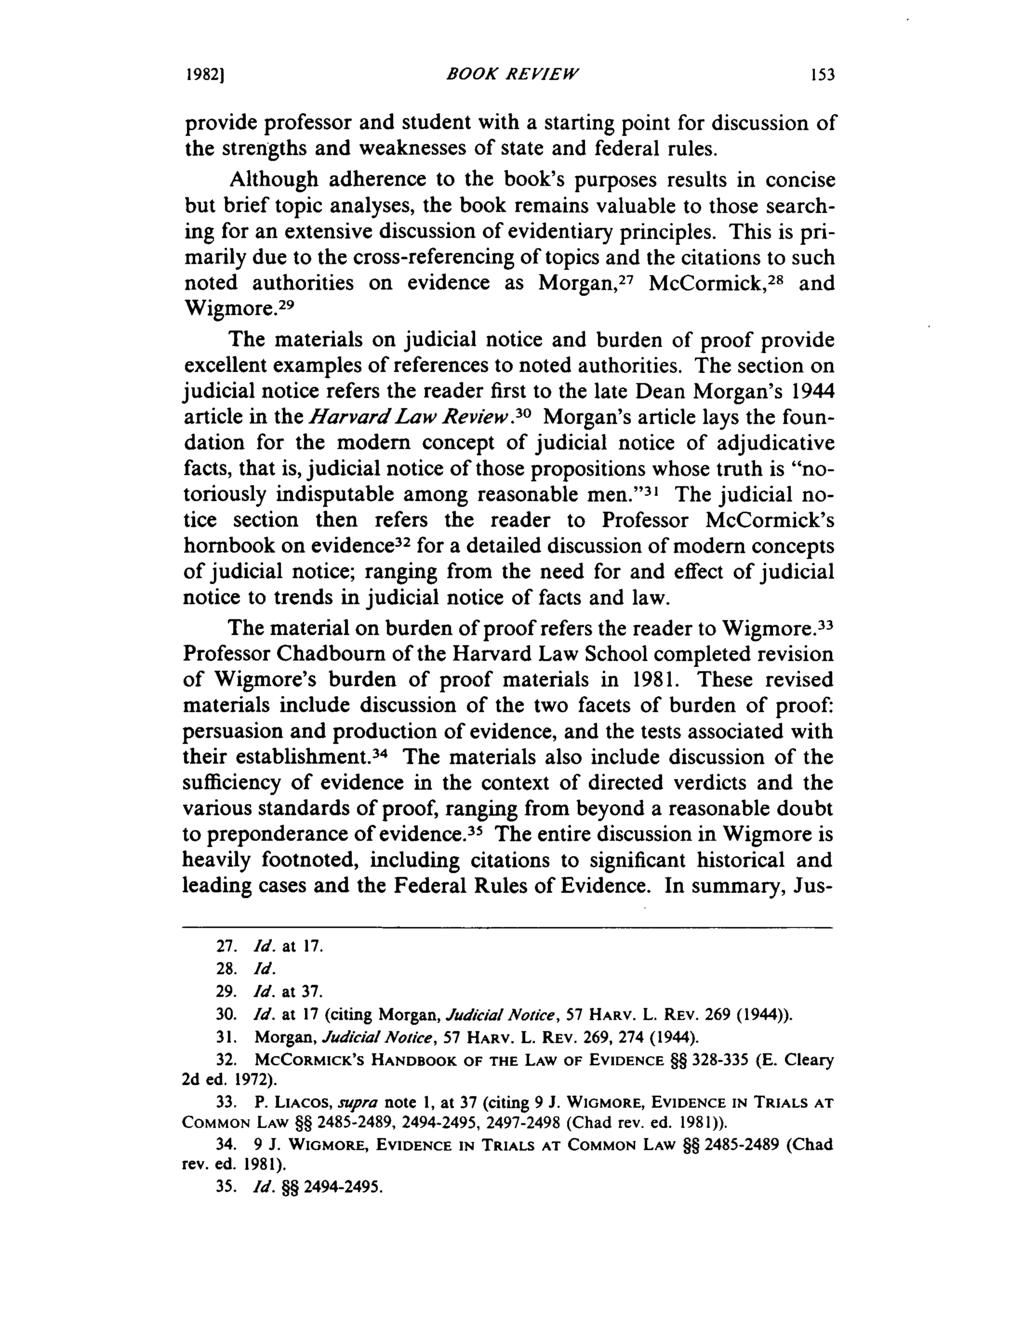 1982) BOOK REVIEW 153 provide professor and student with a starting point for discussion of the strengths and weaknesses of state and federal rules.